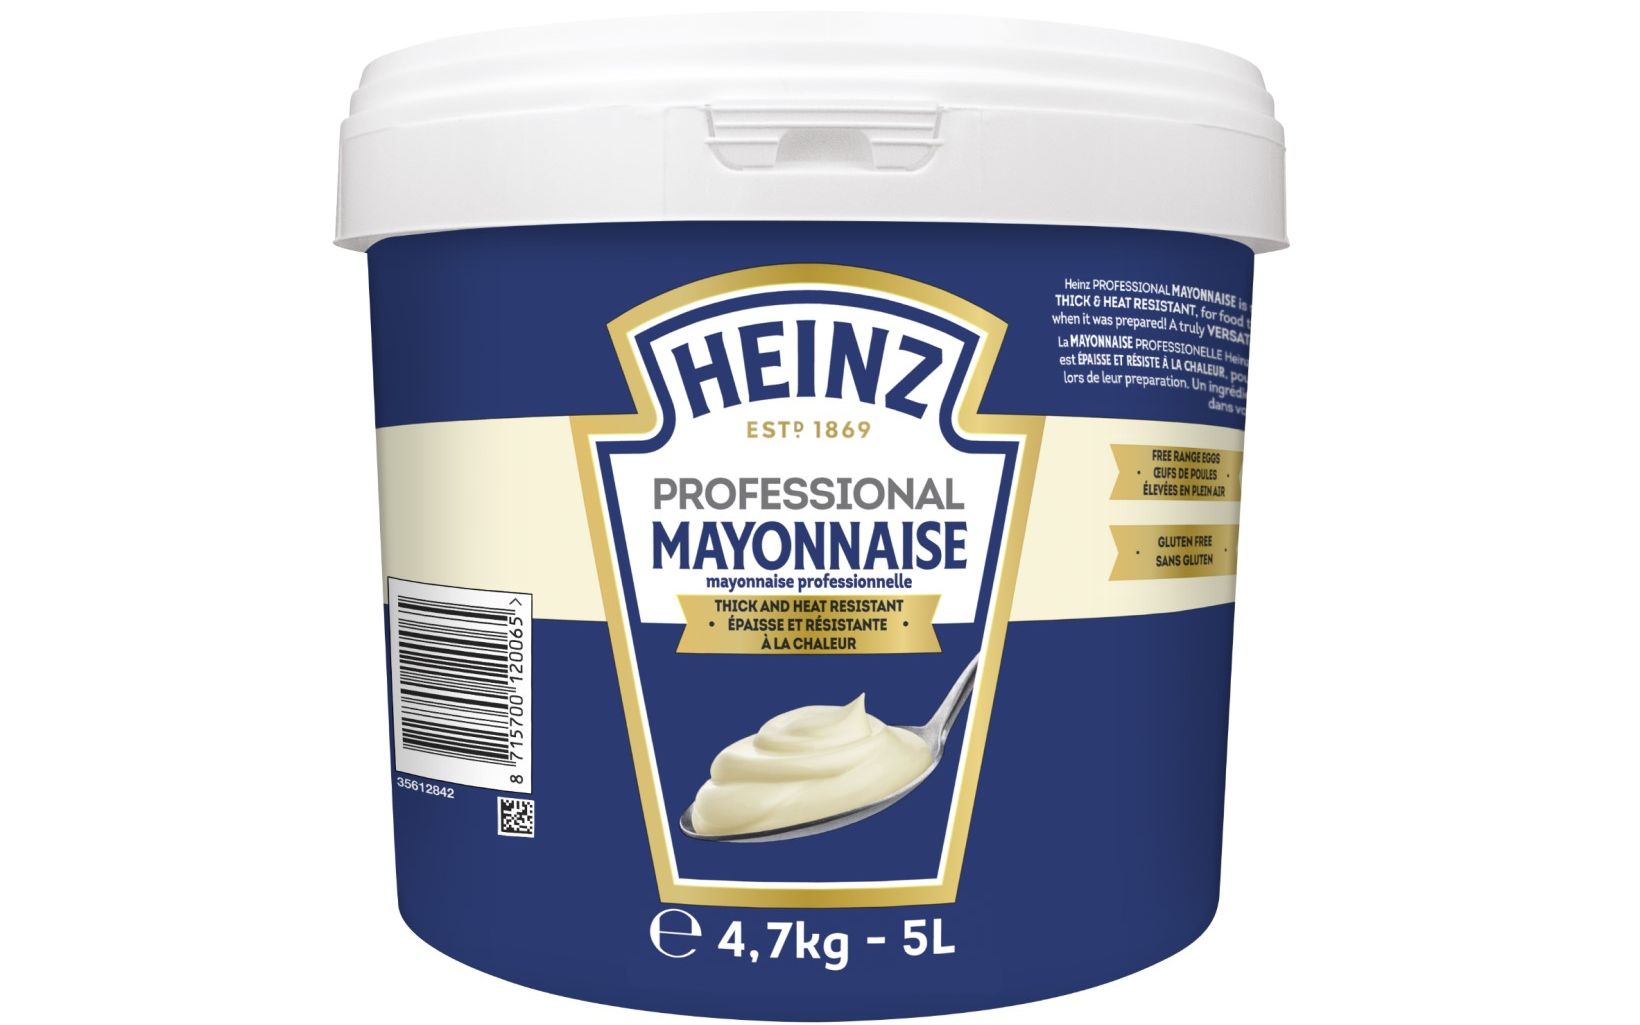 74423 21 35612842 402510025 Heinz Professional Mayonnaise 5l 1 Res Sep22